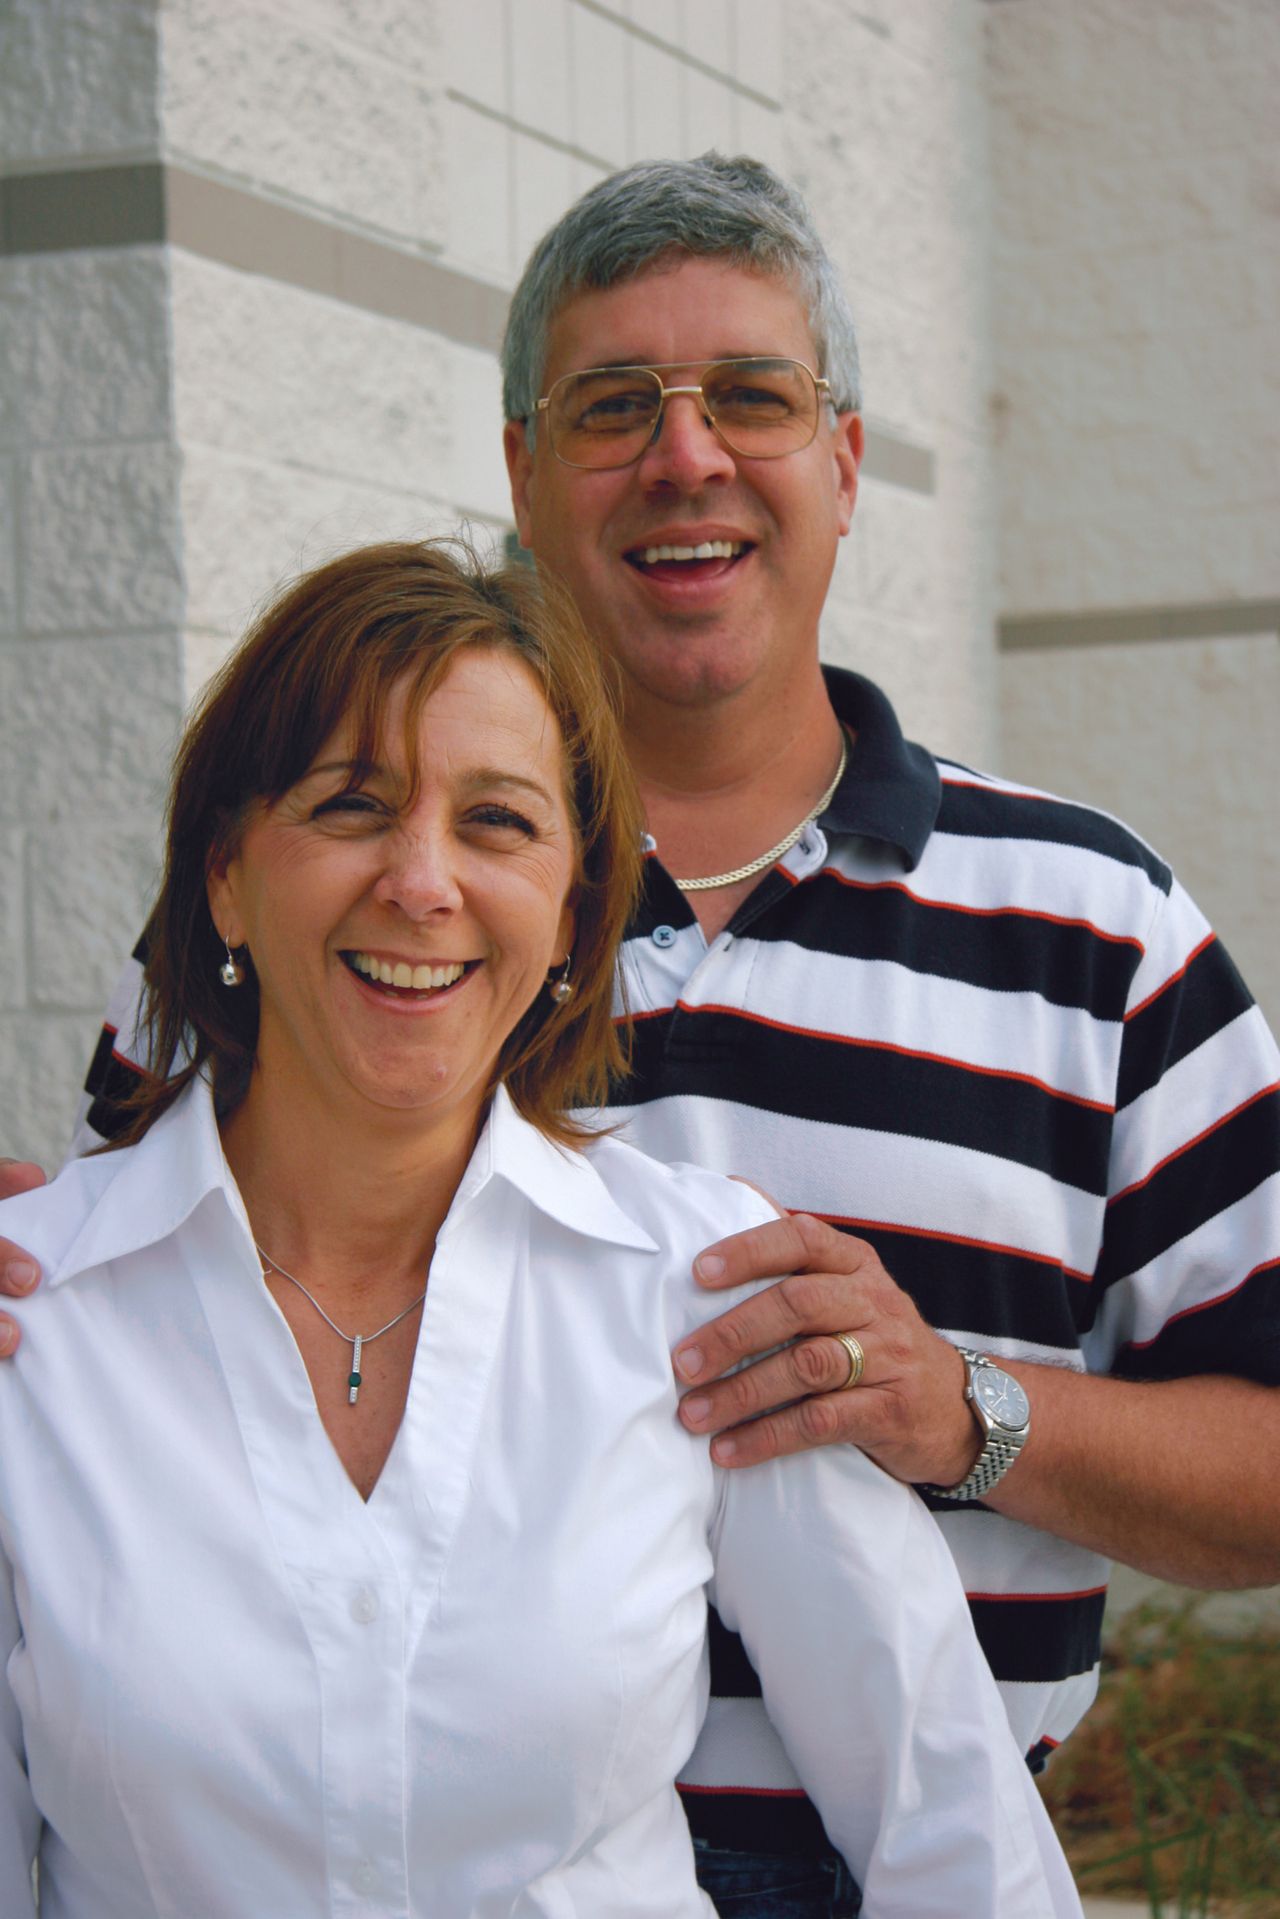 A portrait of a husband and wife smiling.